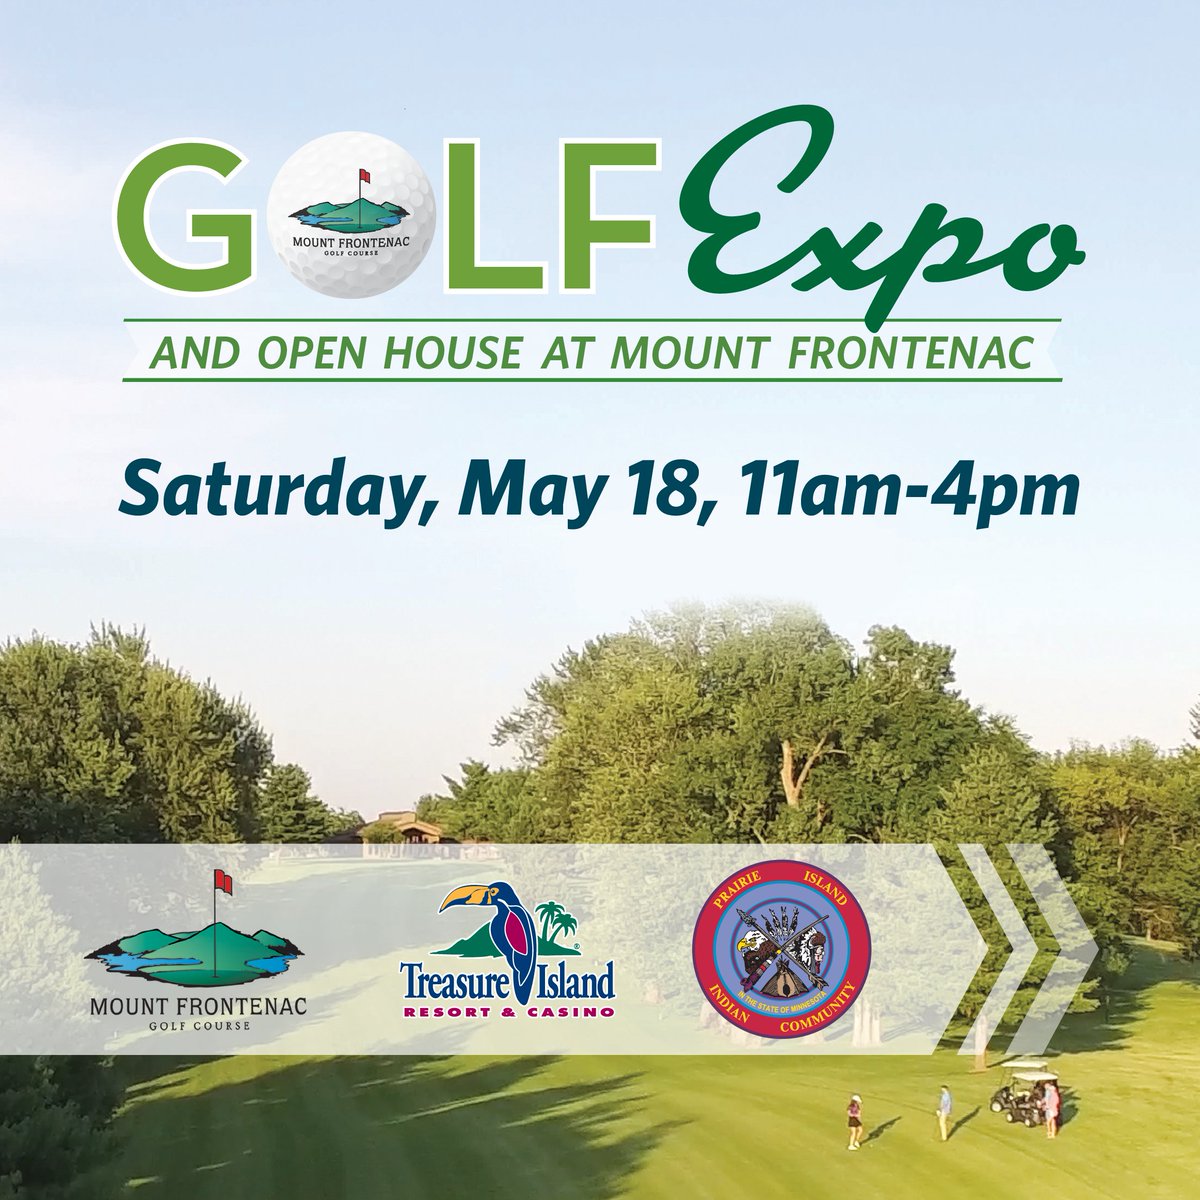 Gear up for the season at Mt. Frontenac’s Golf Expo & Open House on May 18 from 11am-4pm! Up your game with demos from @CallawayGolf, @TourEdgeGolf, @SrixonGolf & more top brands. Plus, enjoy live music, giveaways and more. Make your tee time today at mountfrontenac.com!